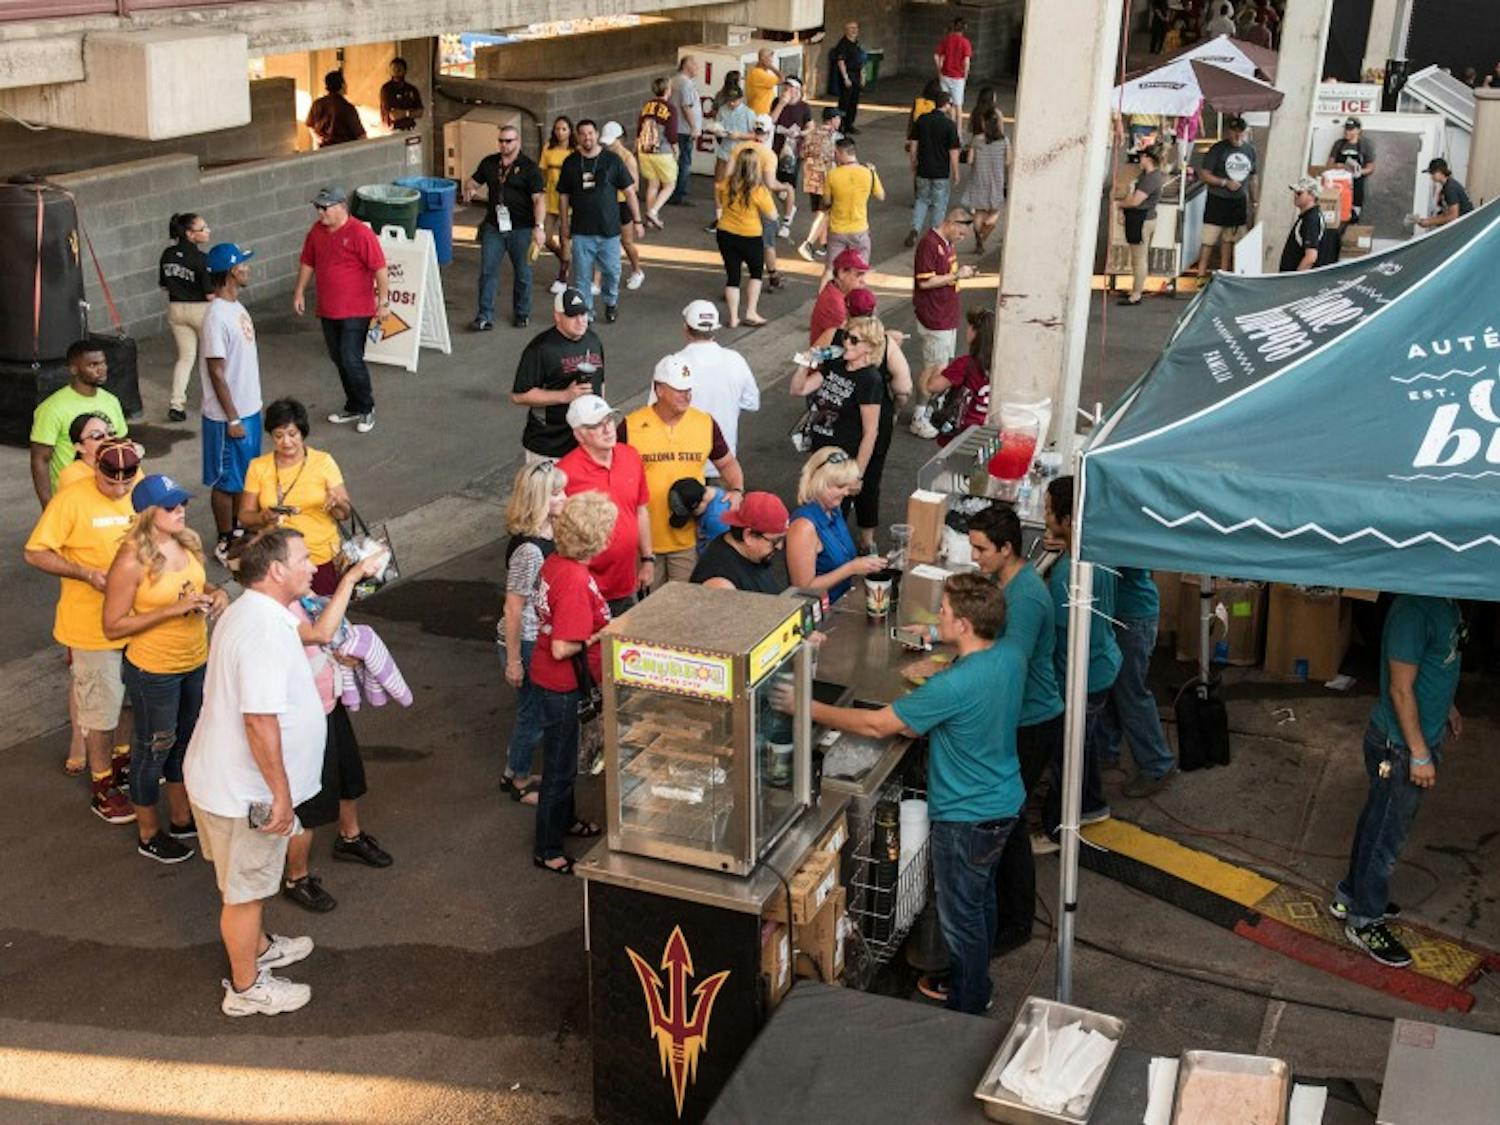 A crowd lines-up for restaurant Someburros’ new location on the east side concourse of Sun Devil Stadium before a game against Texas Tech on Saturday, Sept. 10, 2016.